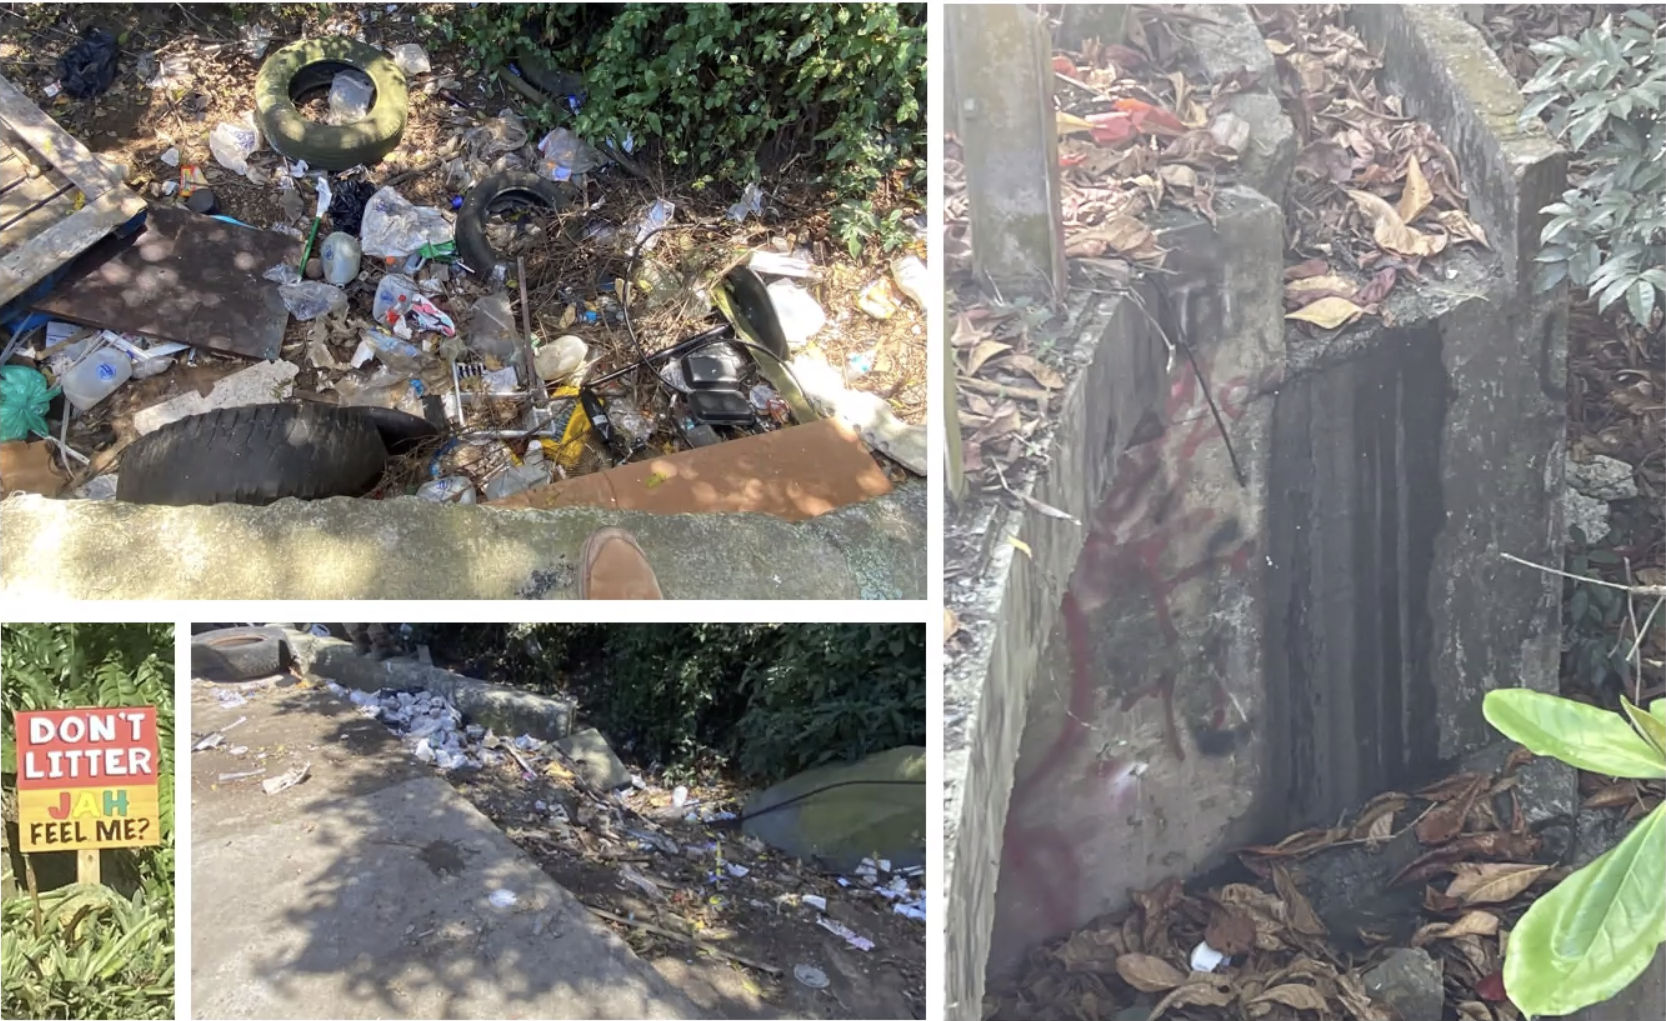 Garbage, whether from poorly managed bin sites or illegal dumping, and debris create stresses on the watershed. (Screenshot from Zoom meeting)